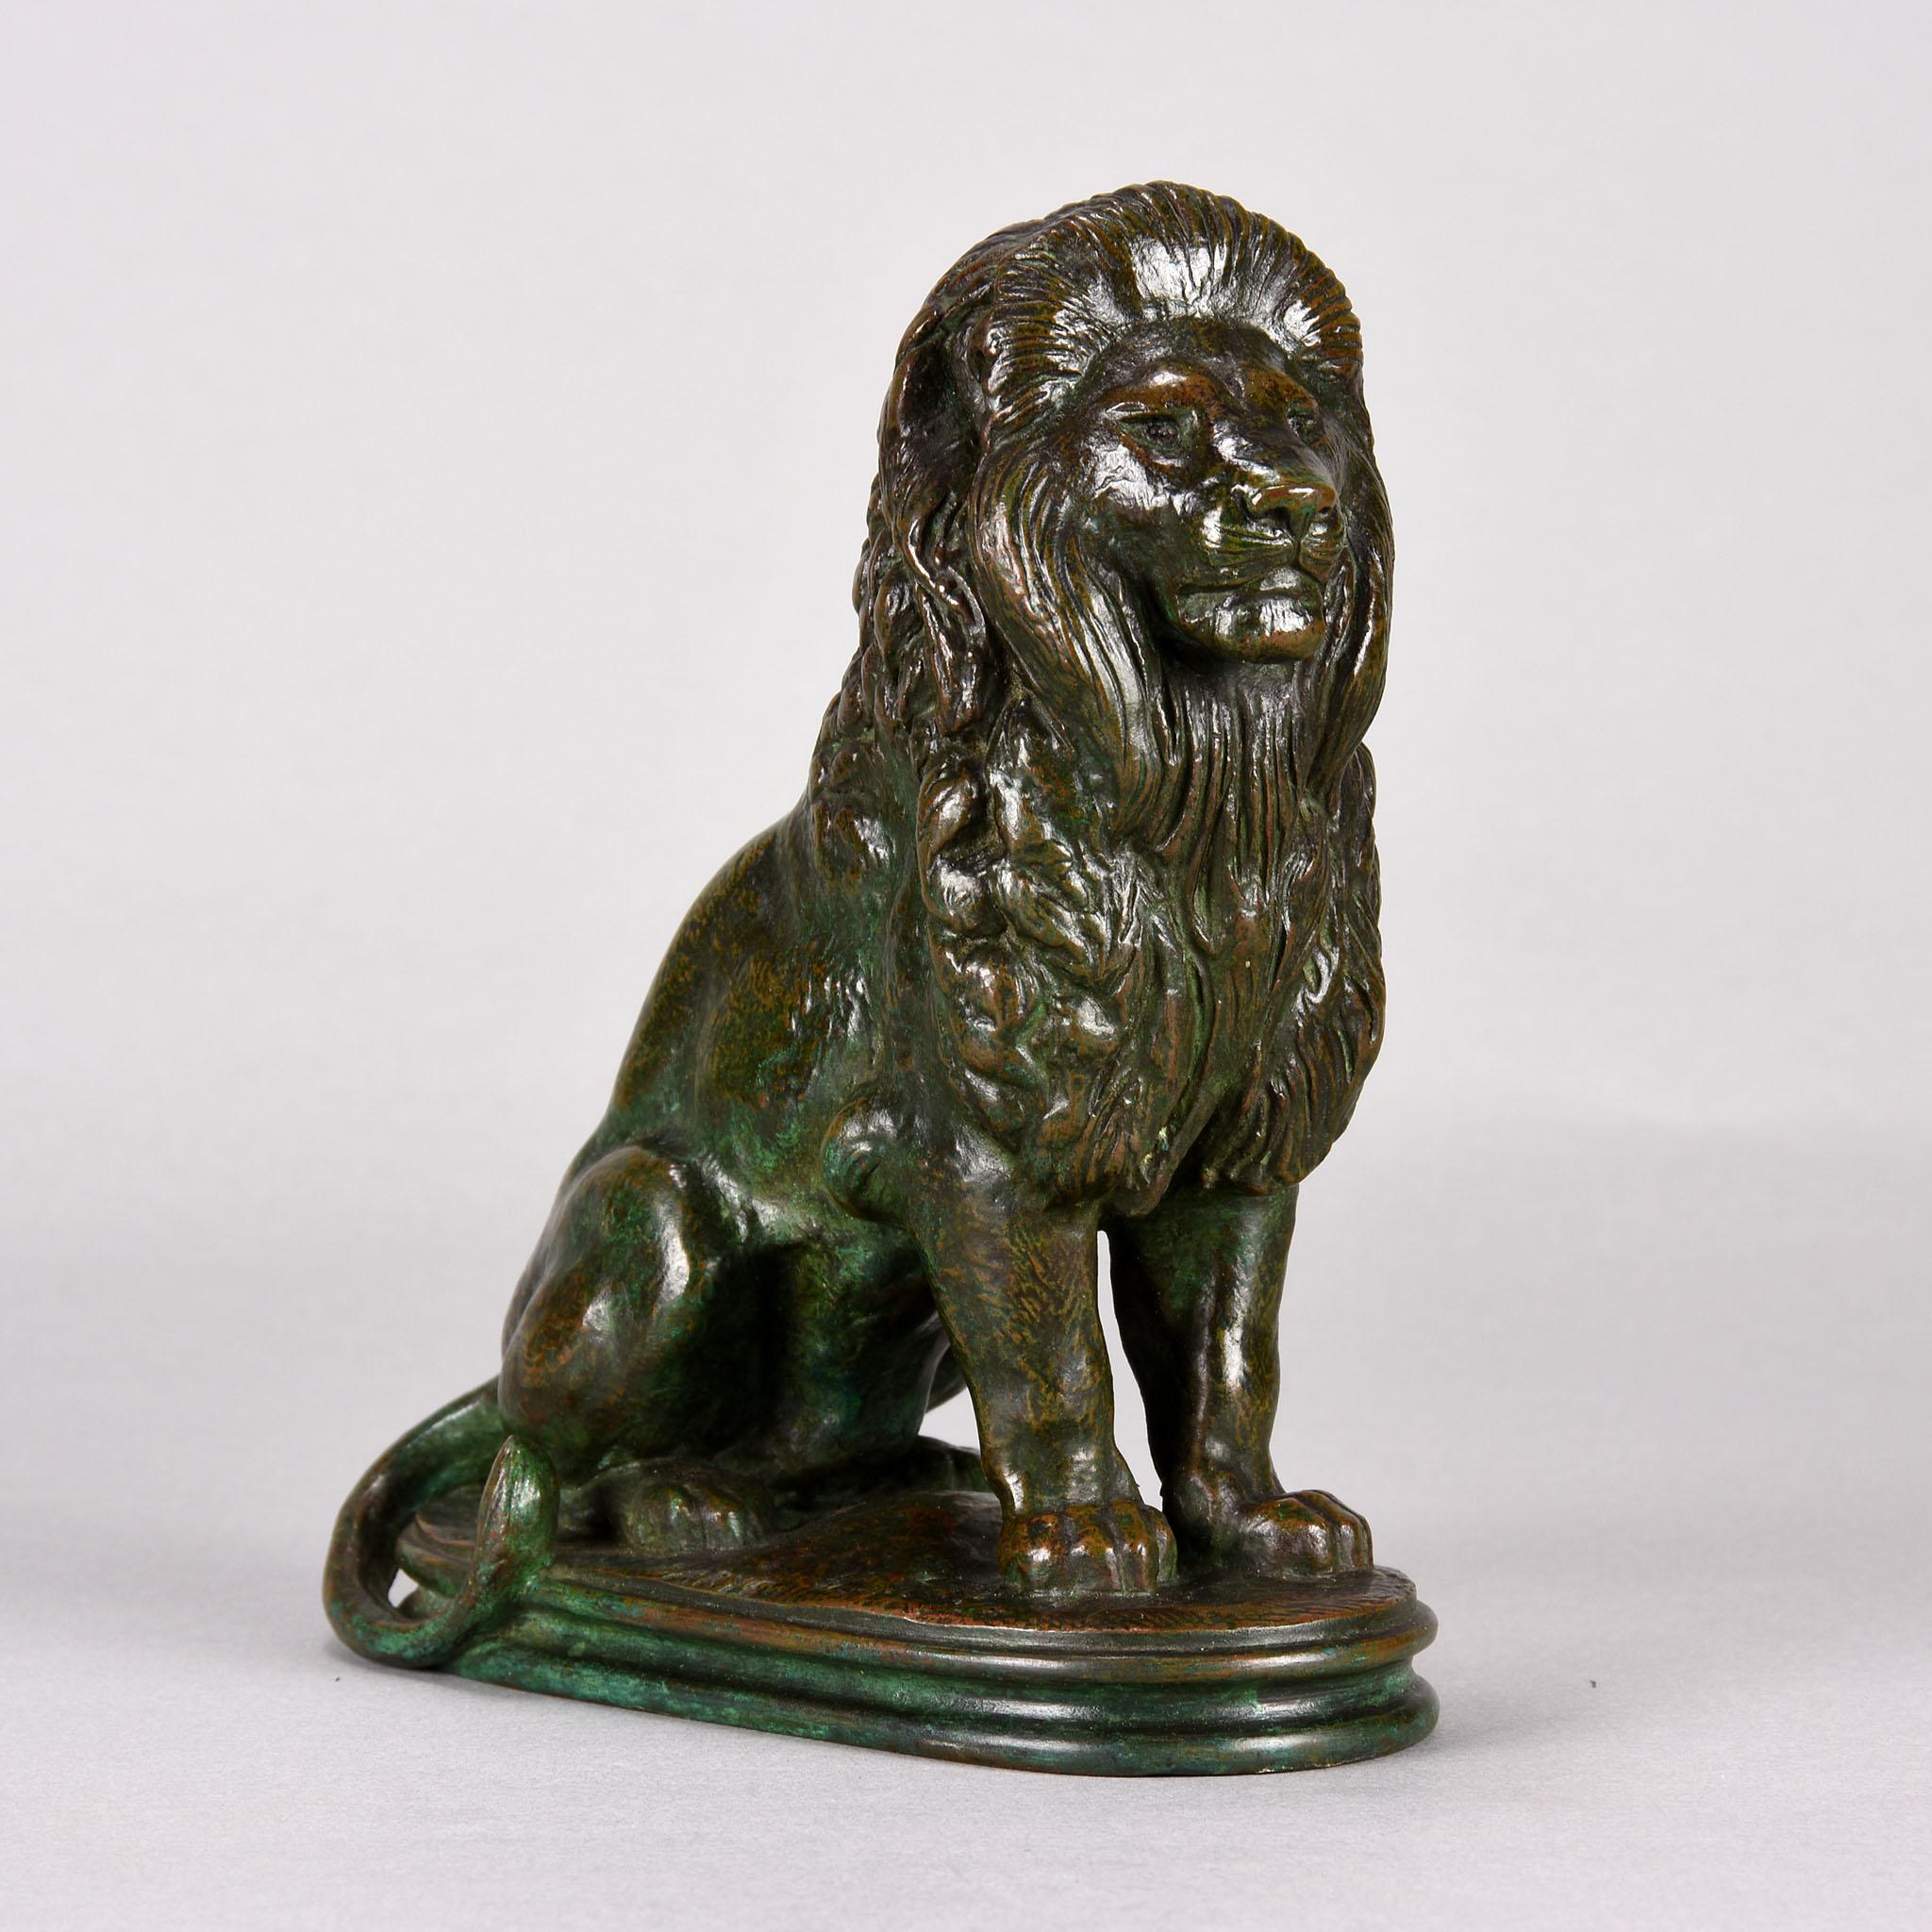 Magnificent 19th century French bronze figure of a majestic seated lion with beautiful autumnal, green, black, brown and orange patination and excellent hand finished surface detail on an oval naturalistic base with integral stepped plinth, signed